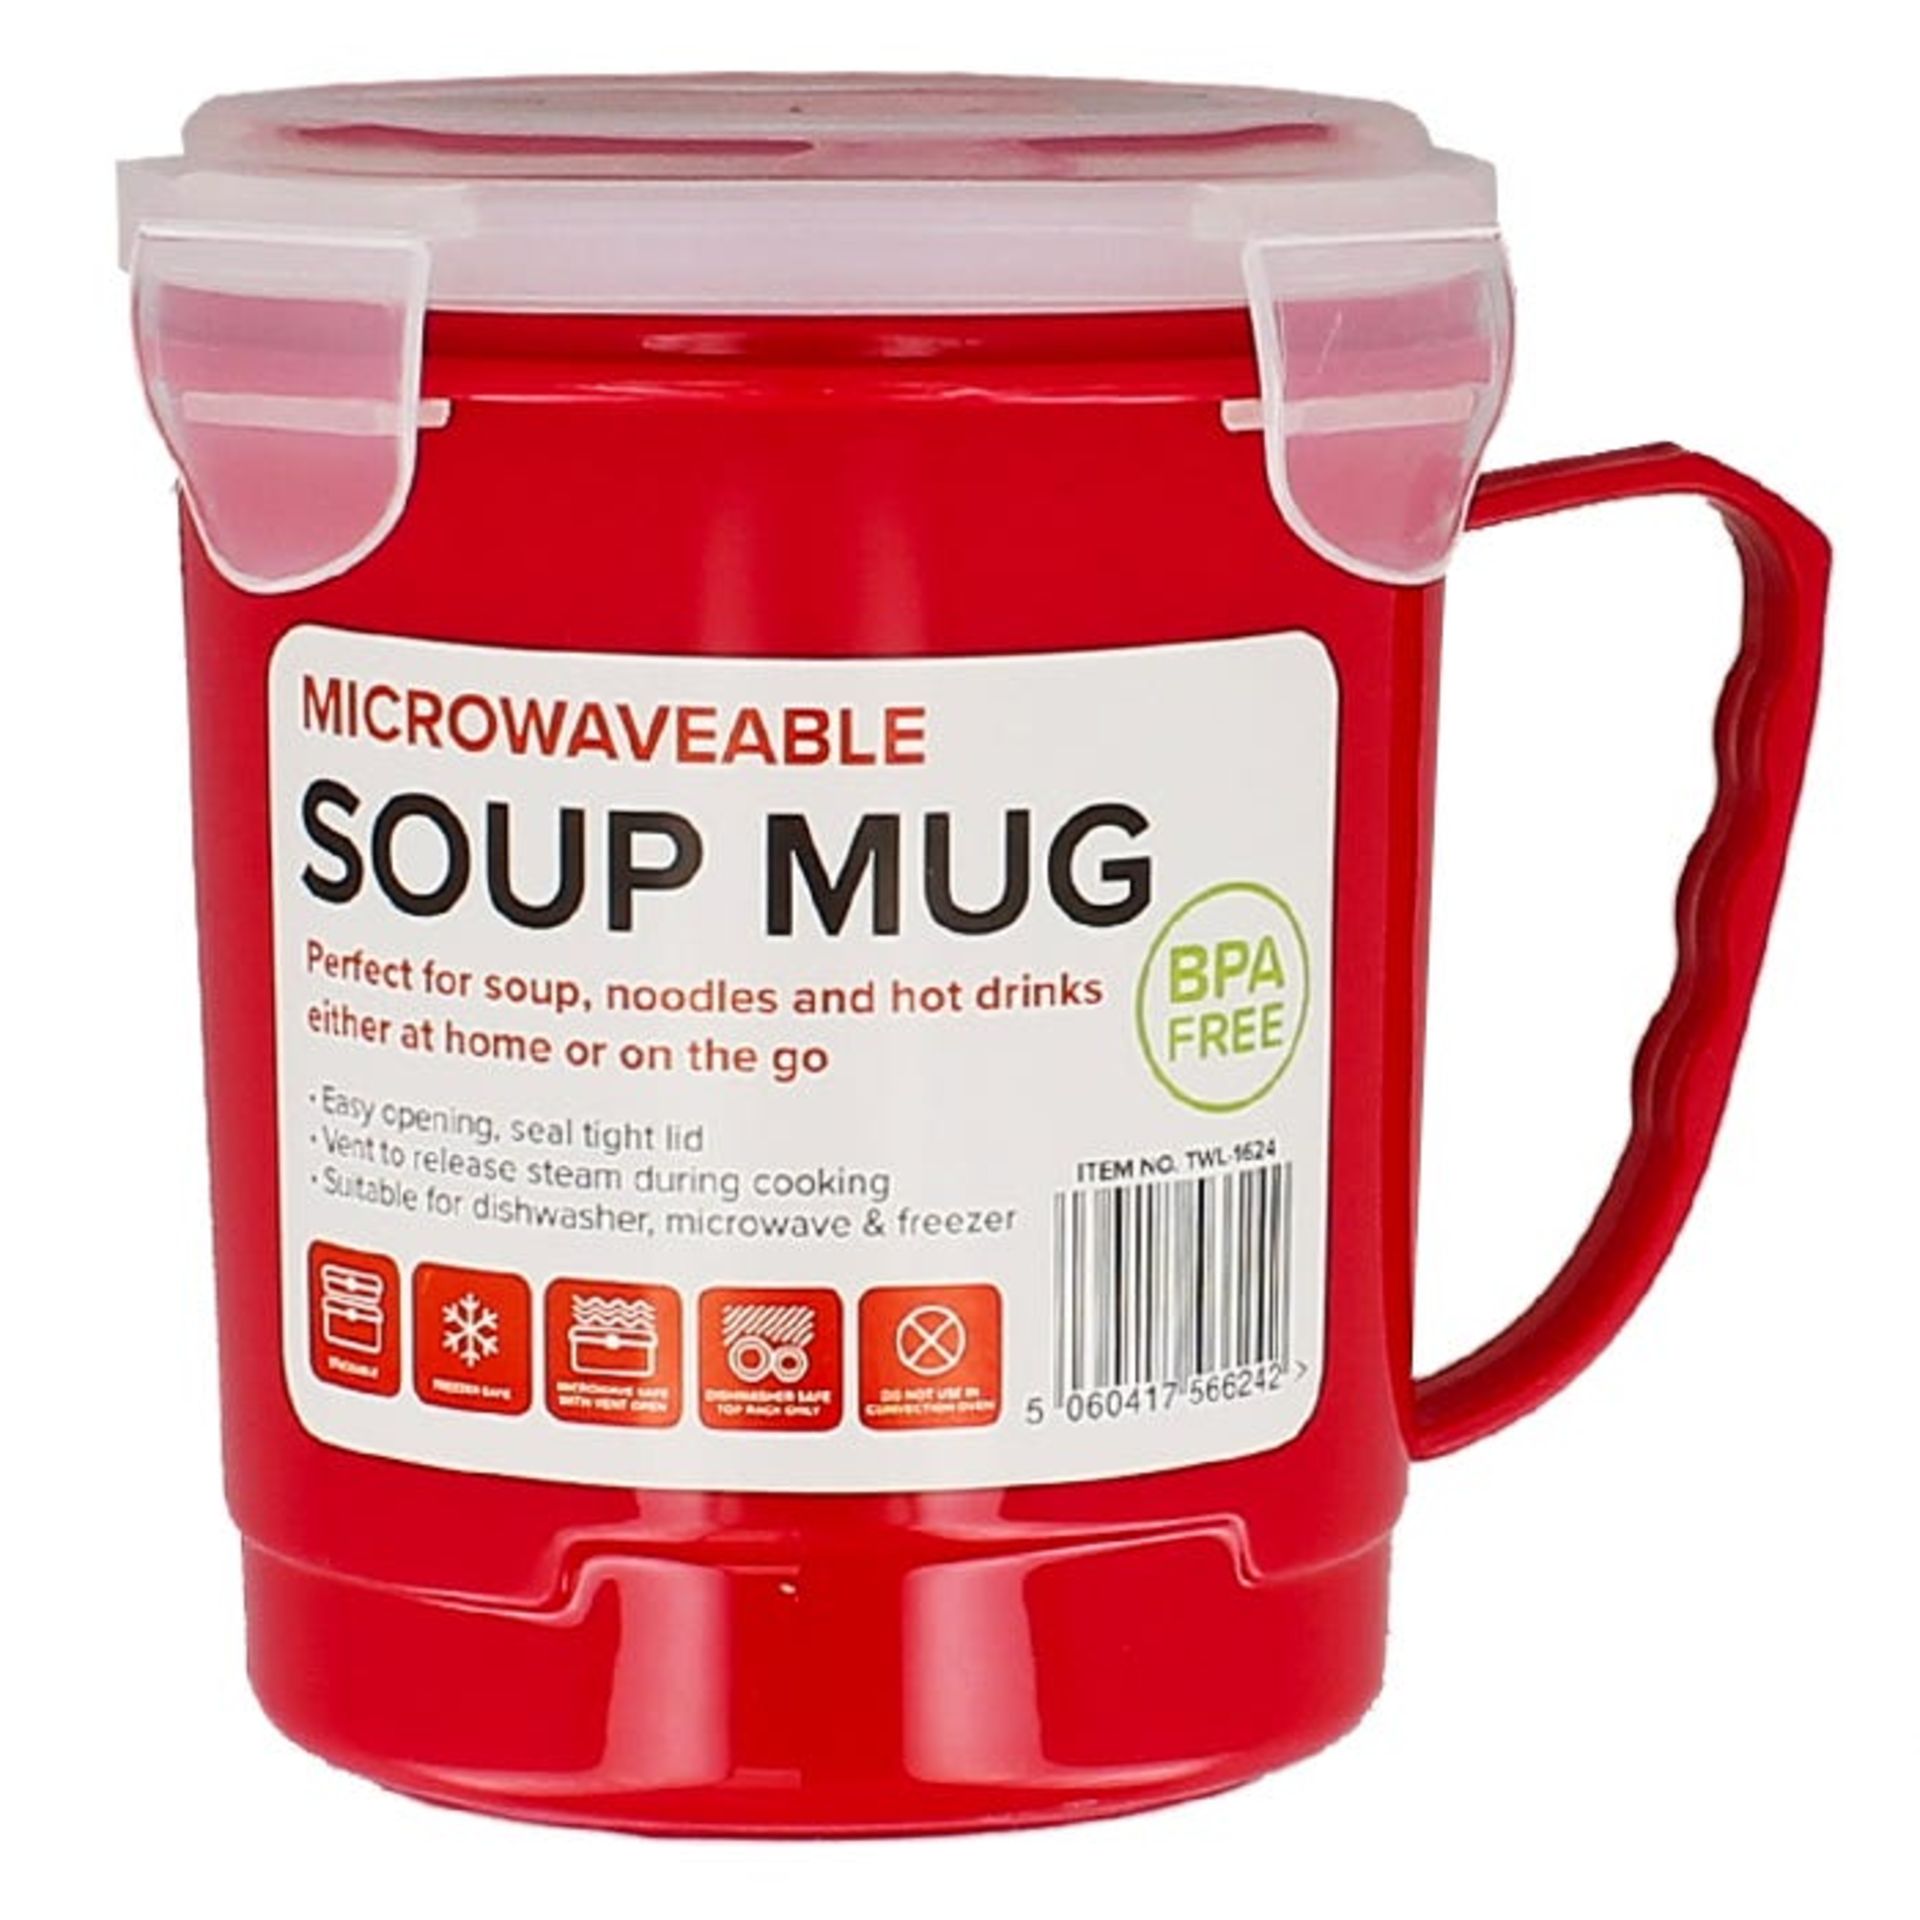 NEW RED MICROWAVEABLE SOUP MUGS